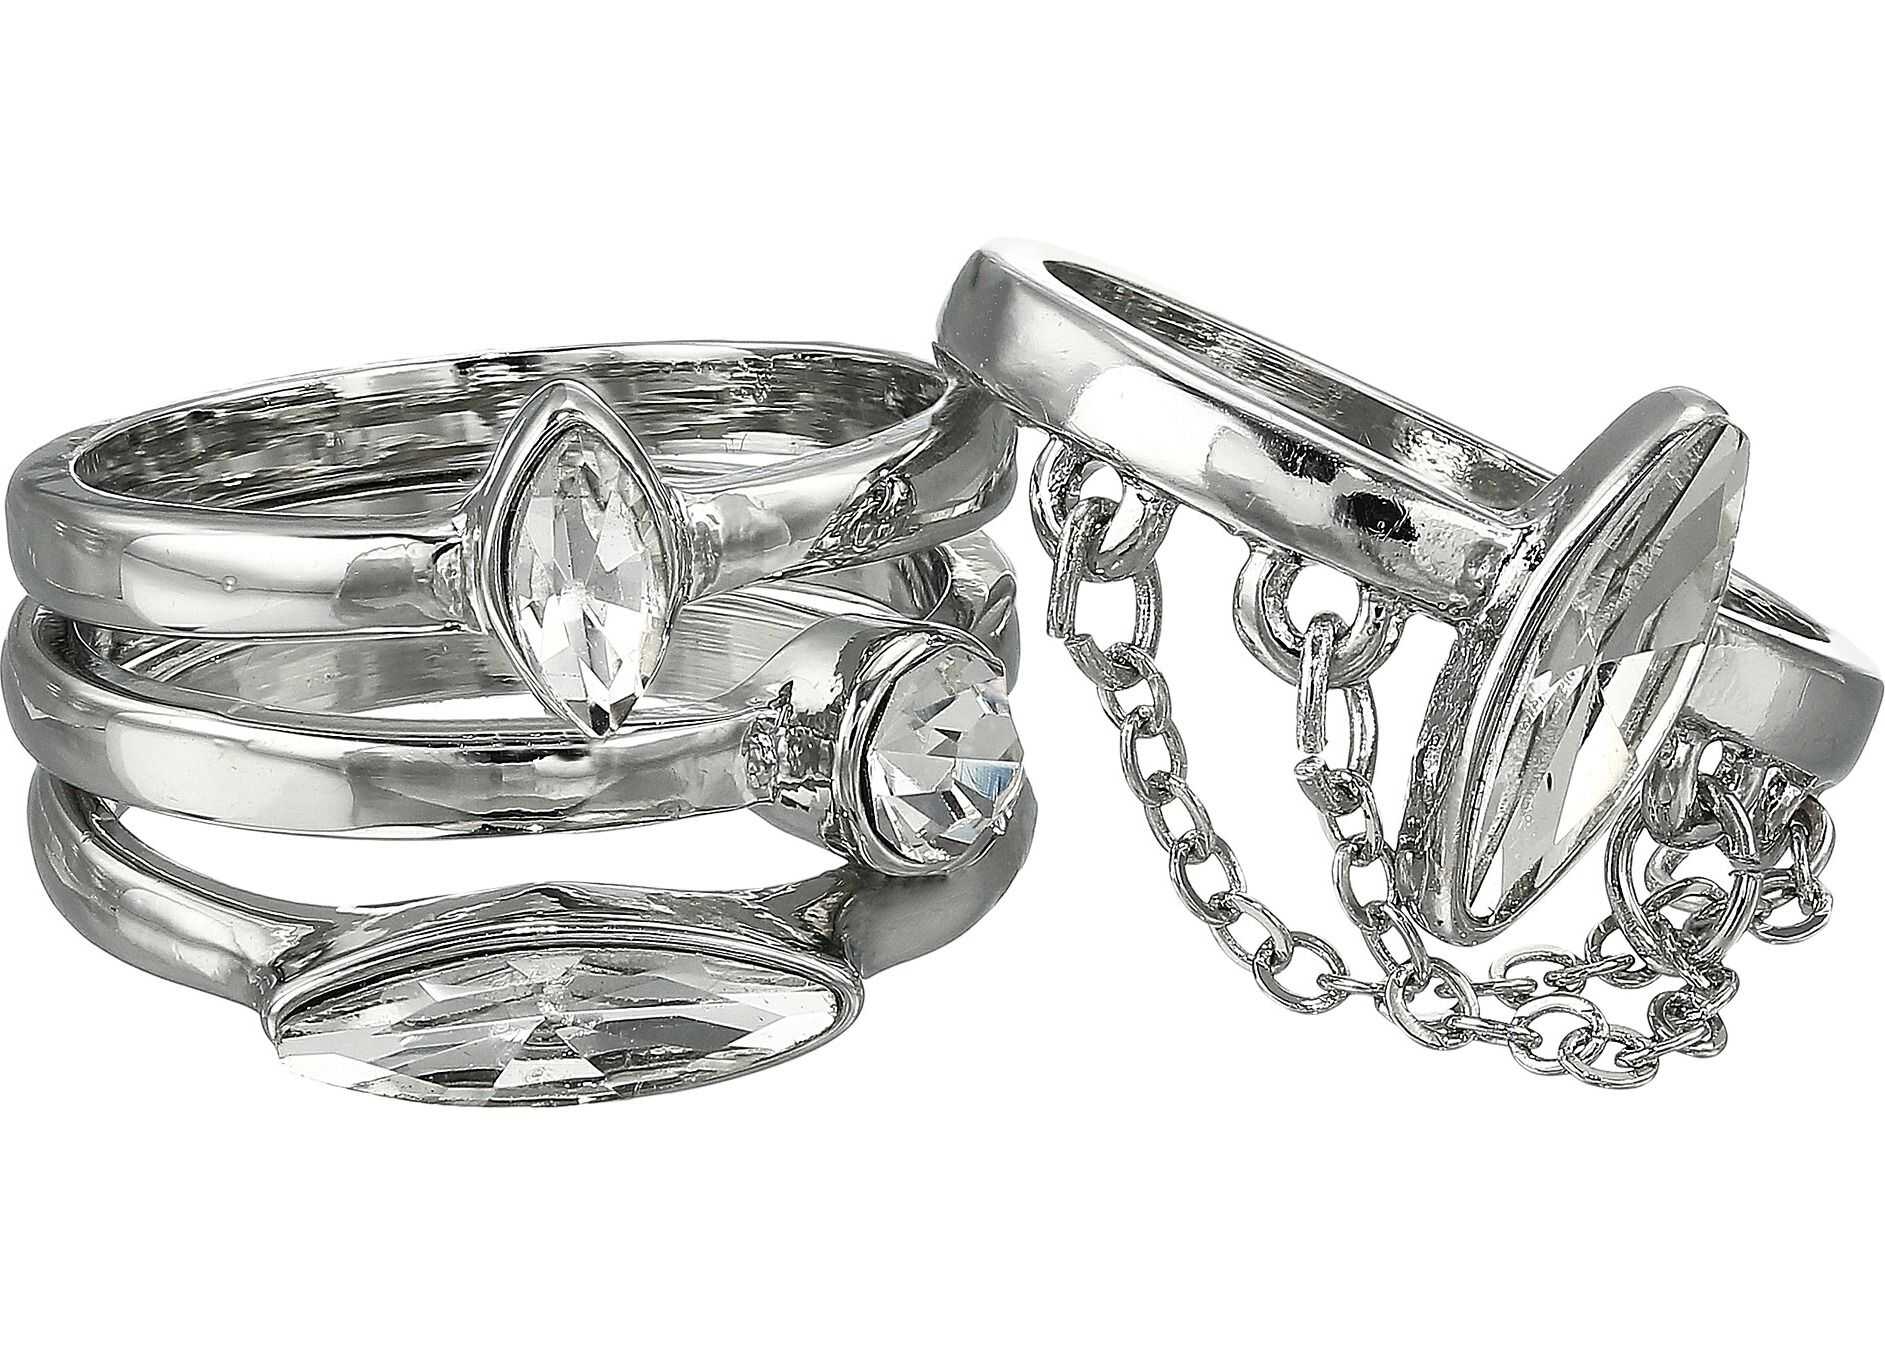 GUESS Four-Piece Dainty Stone Ring Set Silver/Crystal